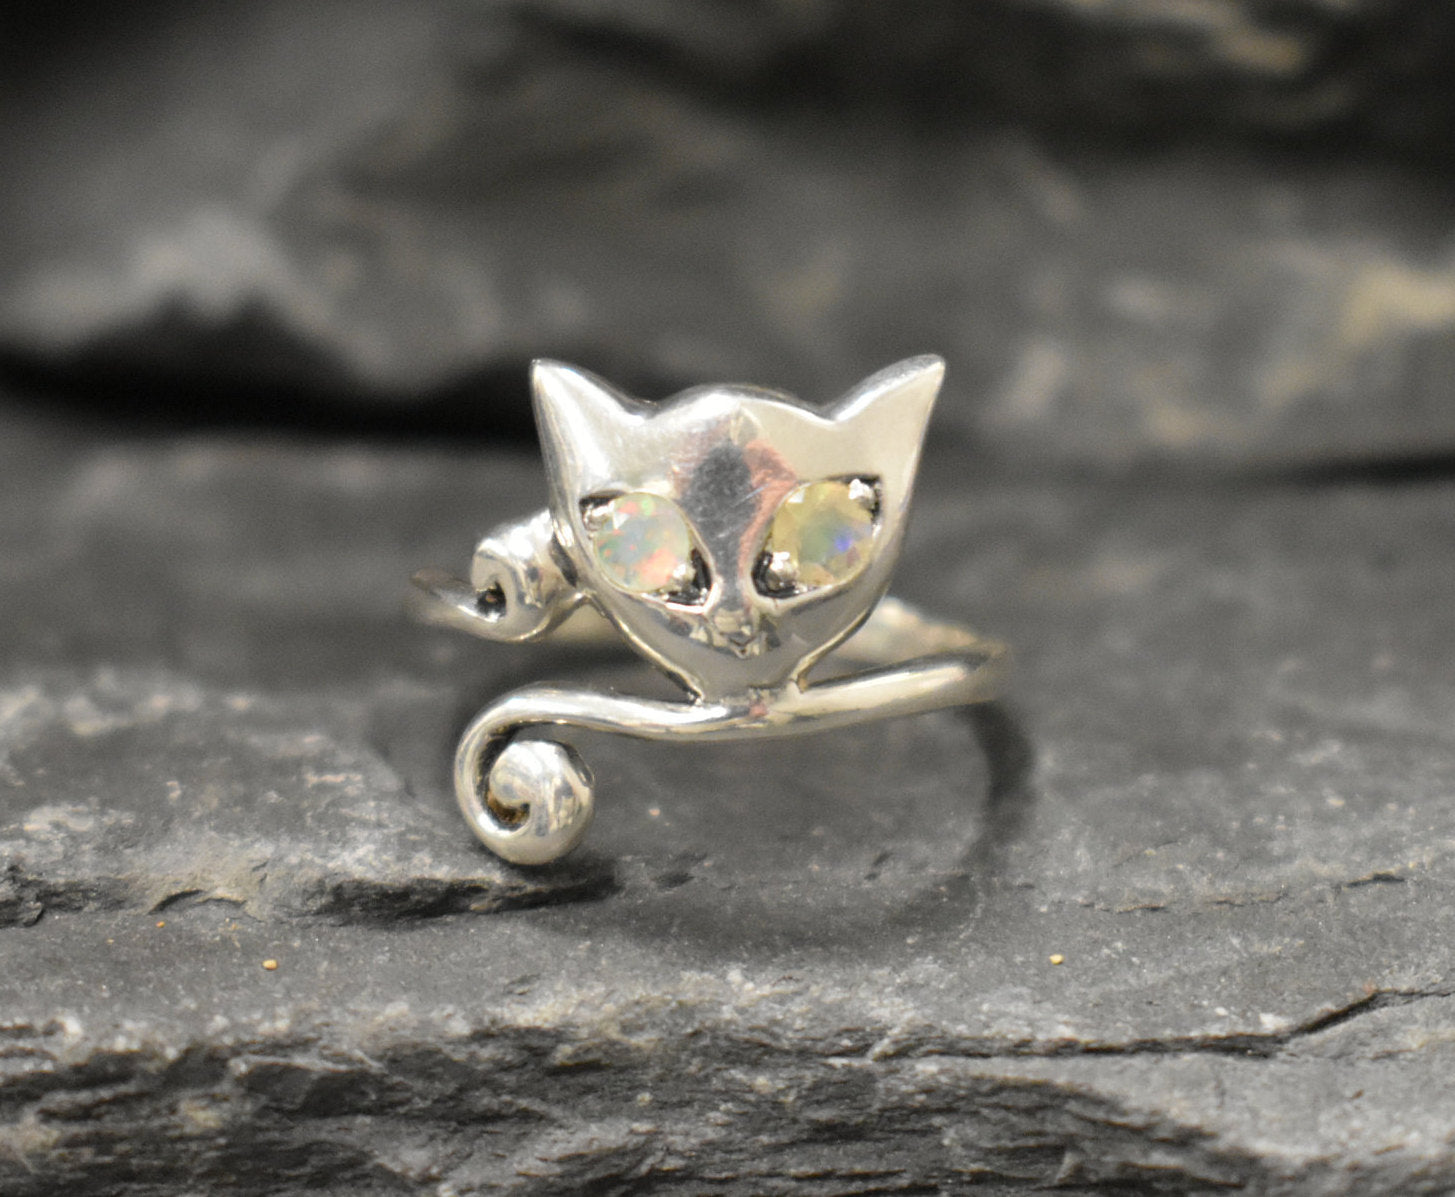 Fire Opal Ring, Opal Ring, Natural Opal Ring, October Birthstone, Silver Cat Ring, Vintage Ring, Cats Eye Ring, Cat Ring, Solid Silver Ring